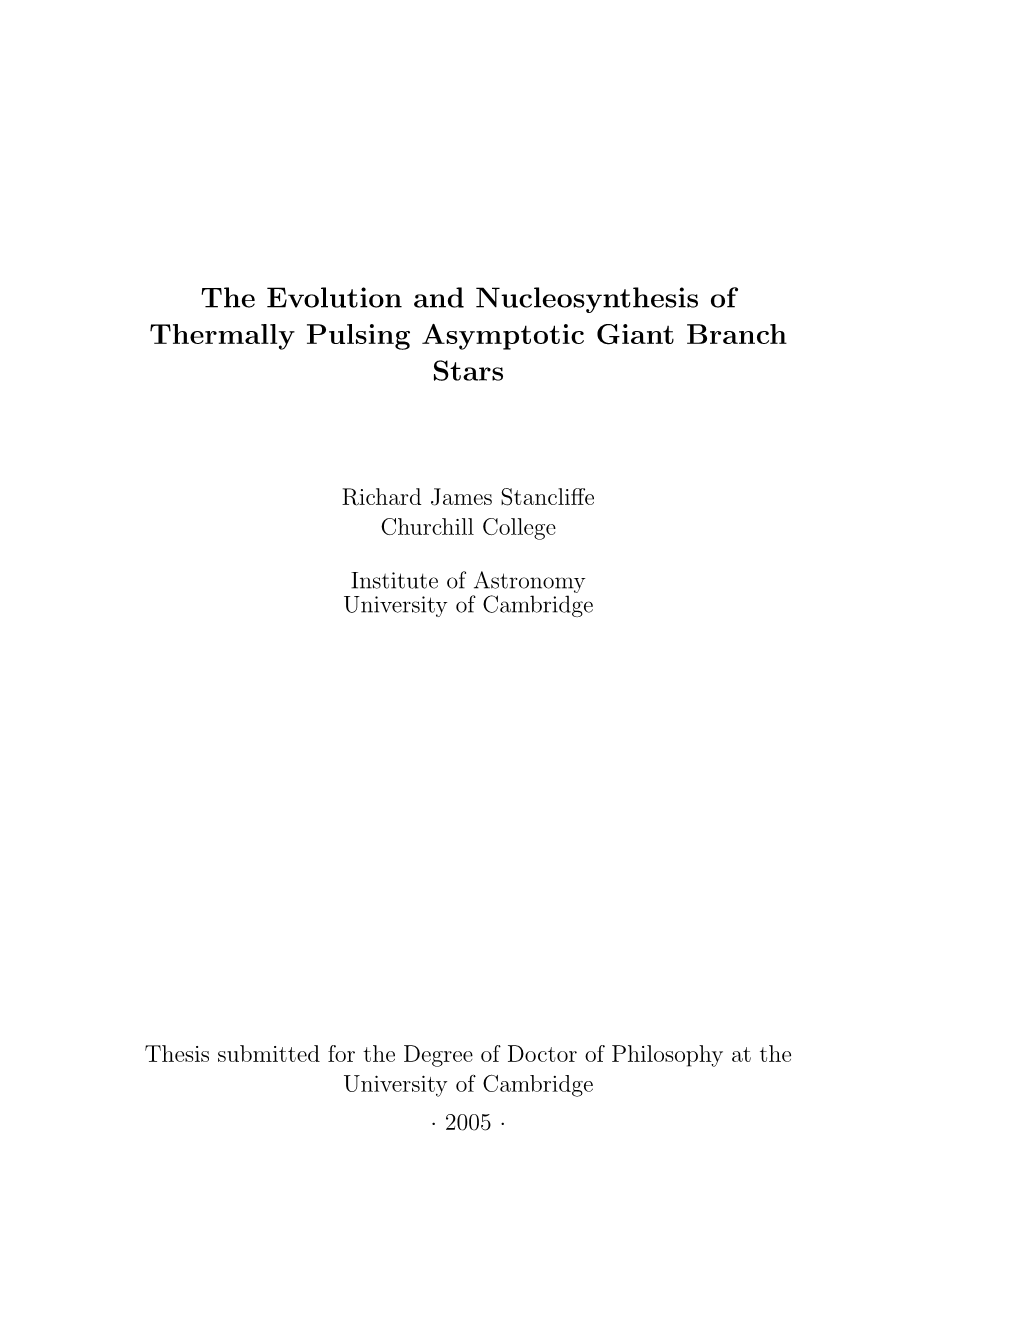 The Evolution and Nucleosynthesis of Thermally Pulsing Asymptotic Giant Branch Stars